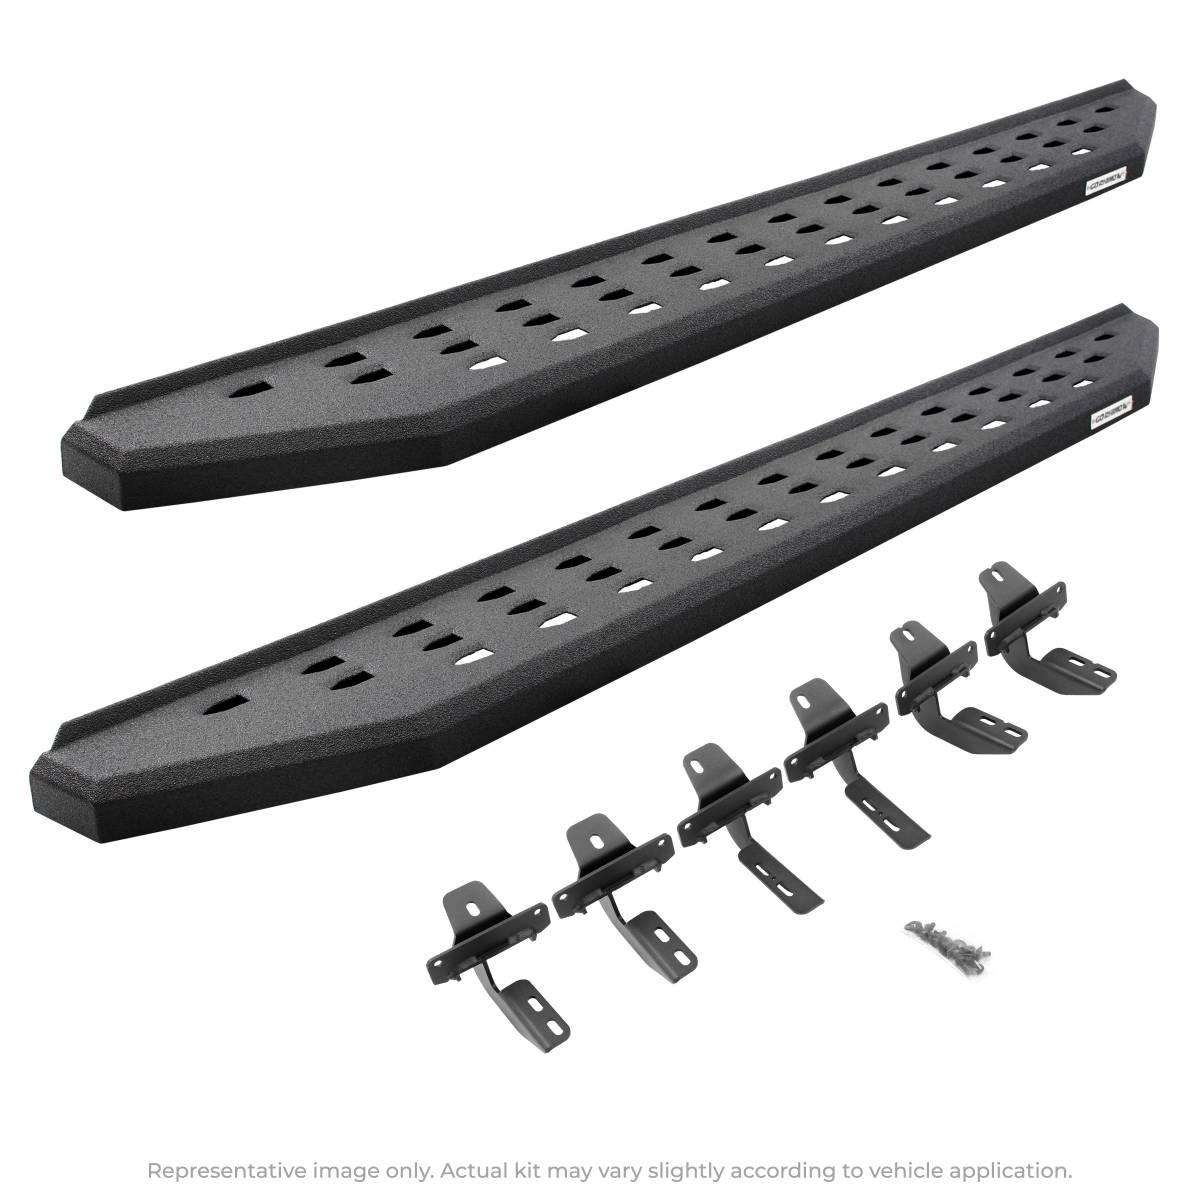 RB20 Running Boards with Mounting Brackets Kit - MyTruckPoint